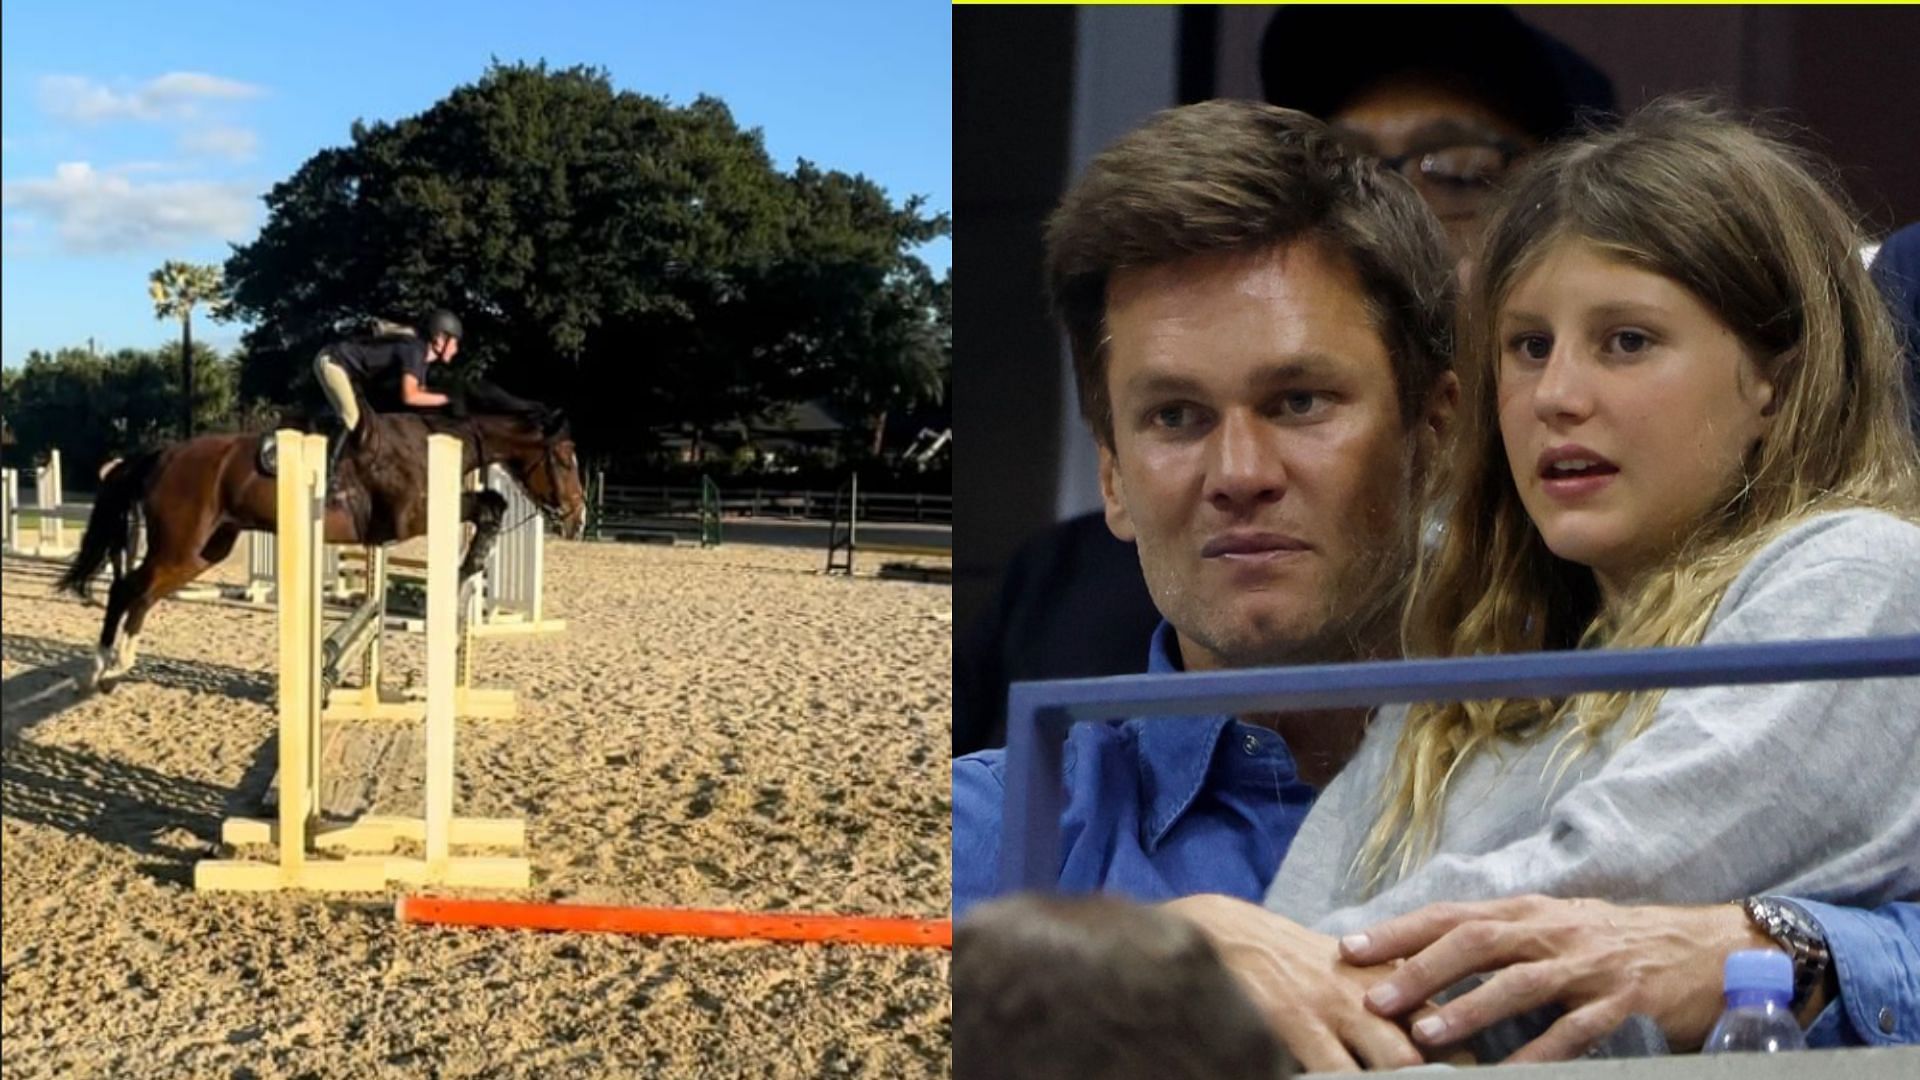 Tom Brady’s daughter Vivian makes him proud with her horse show